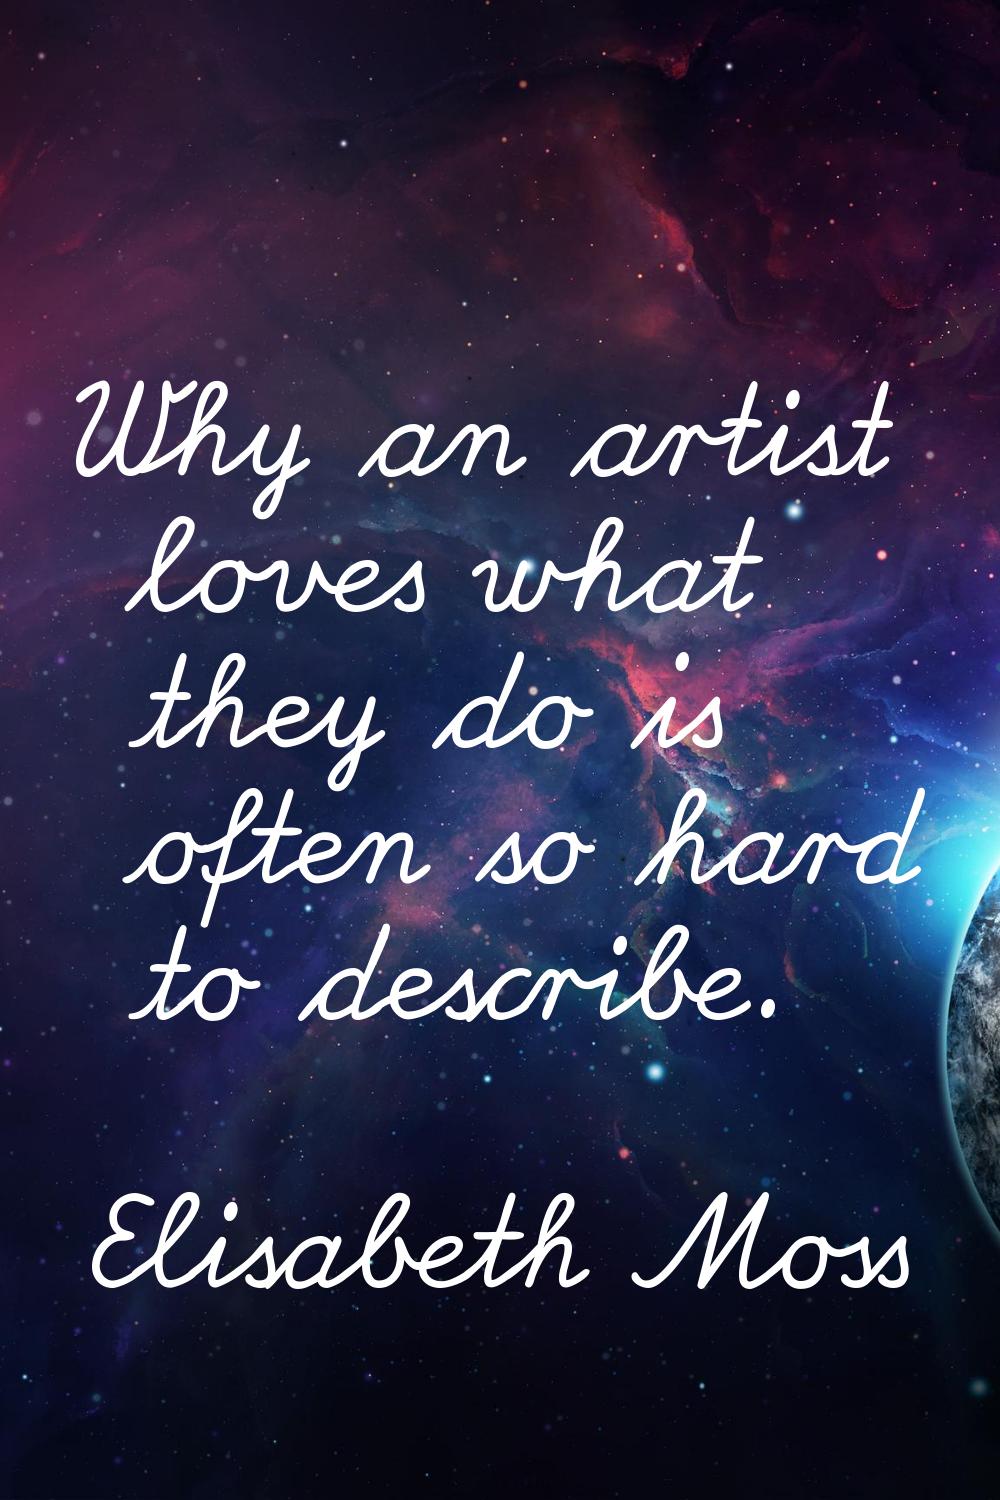 Why an artist loves what they do is often so hard to describe.